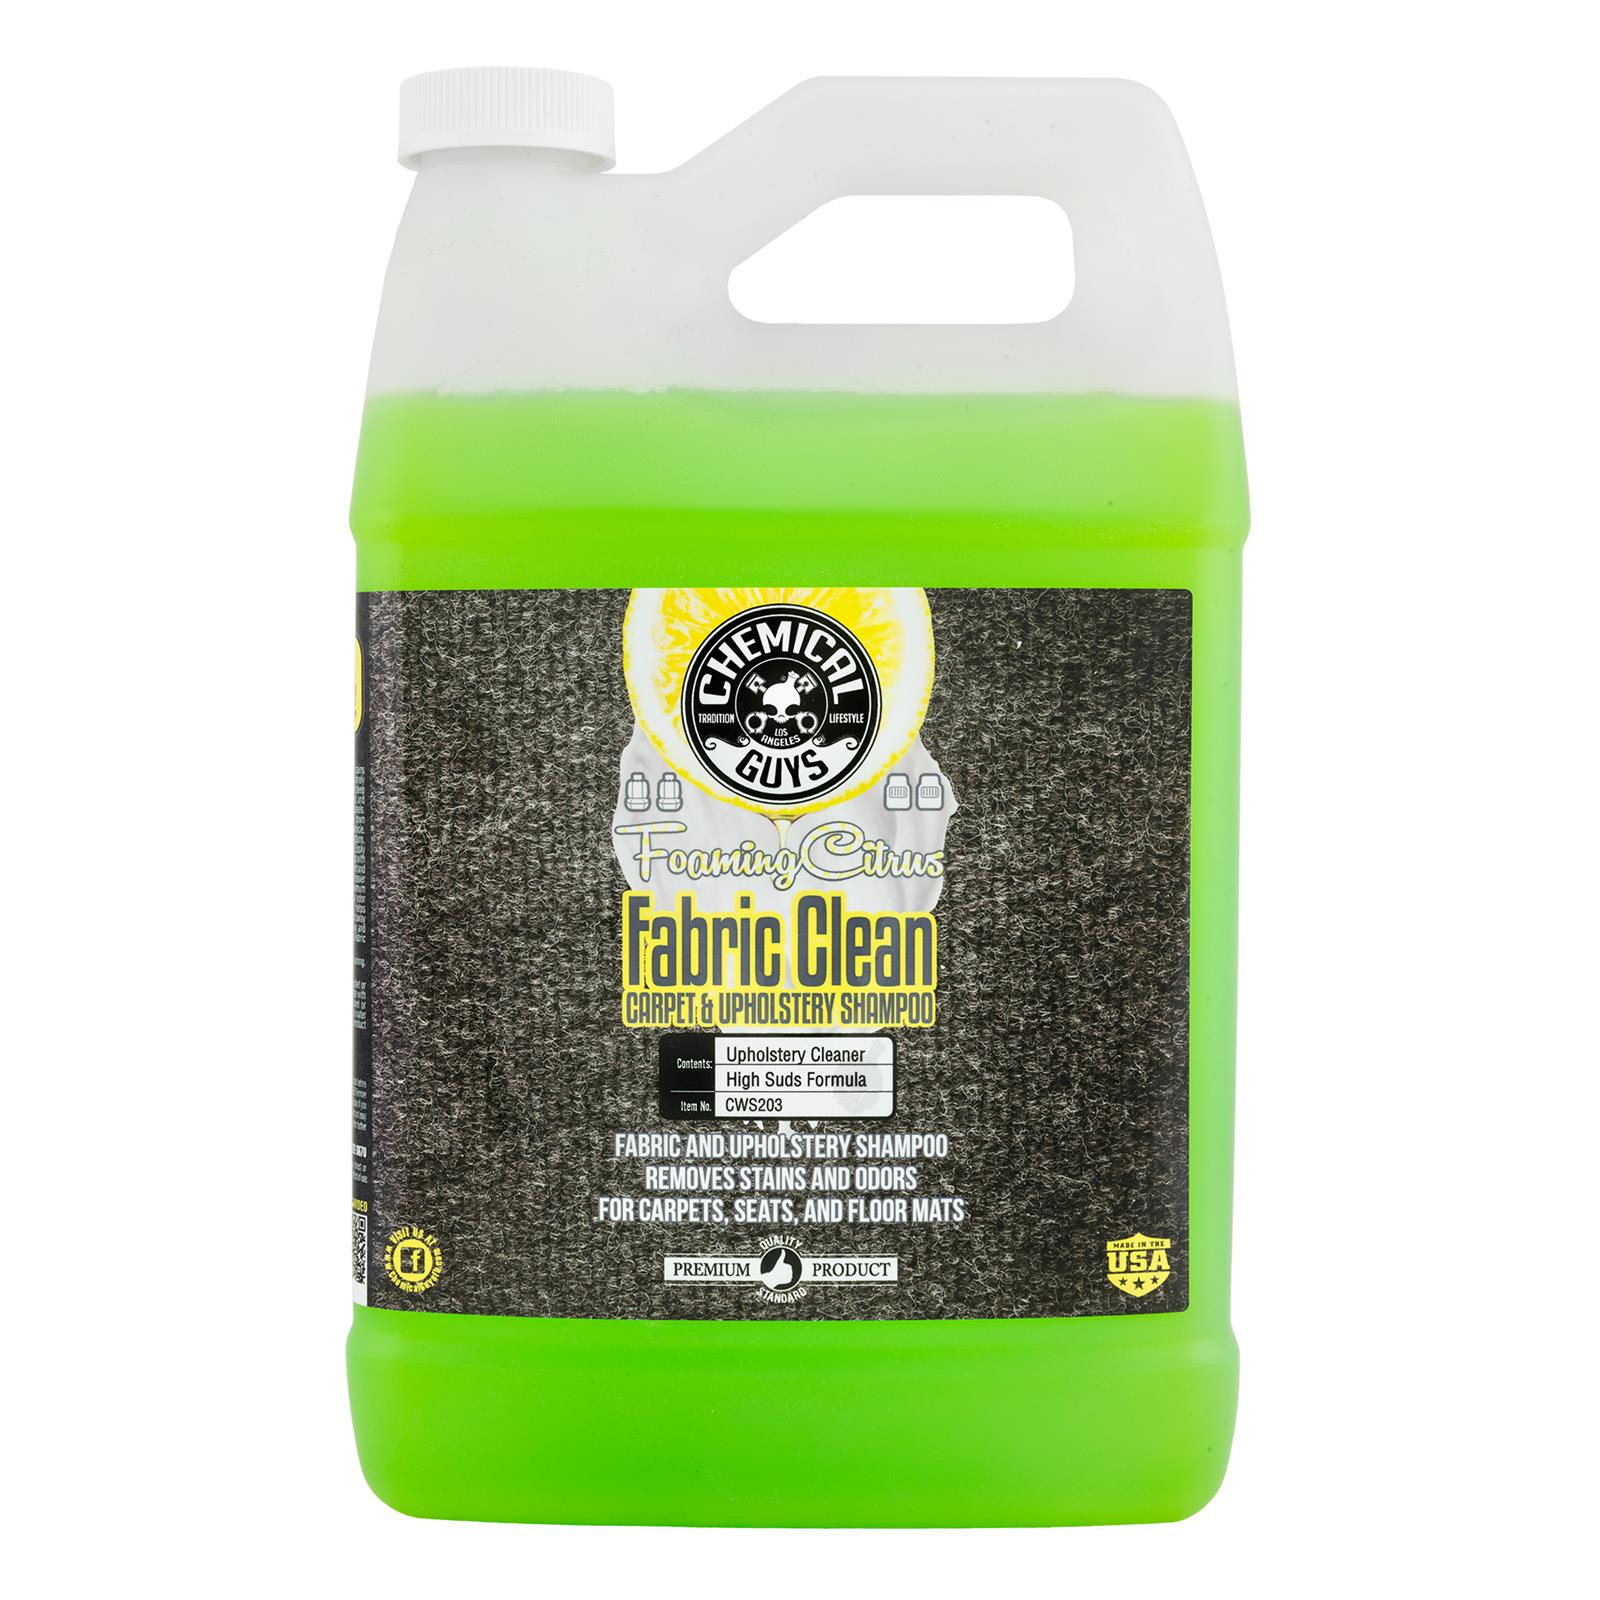 Chemical Guys CWS203 Chemical Guys Foaming Citrus Fabric Clean Carpet &  Upholstery Shampoo & Odor Eliminator